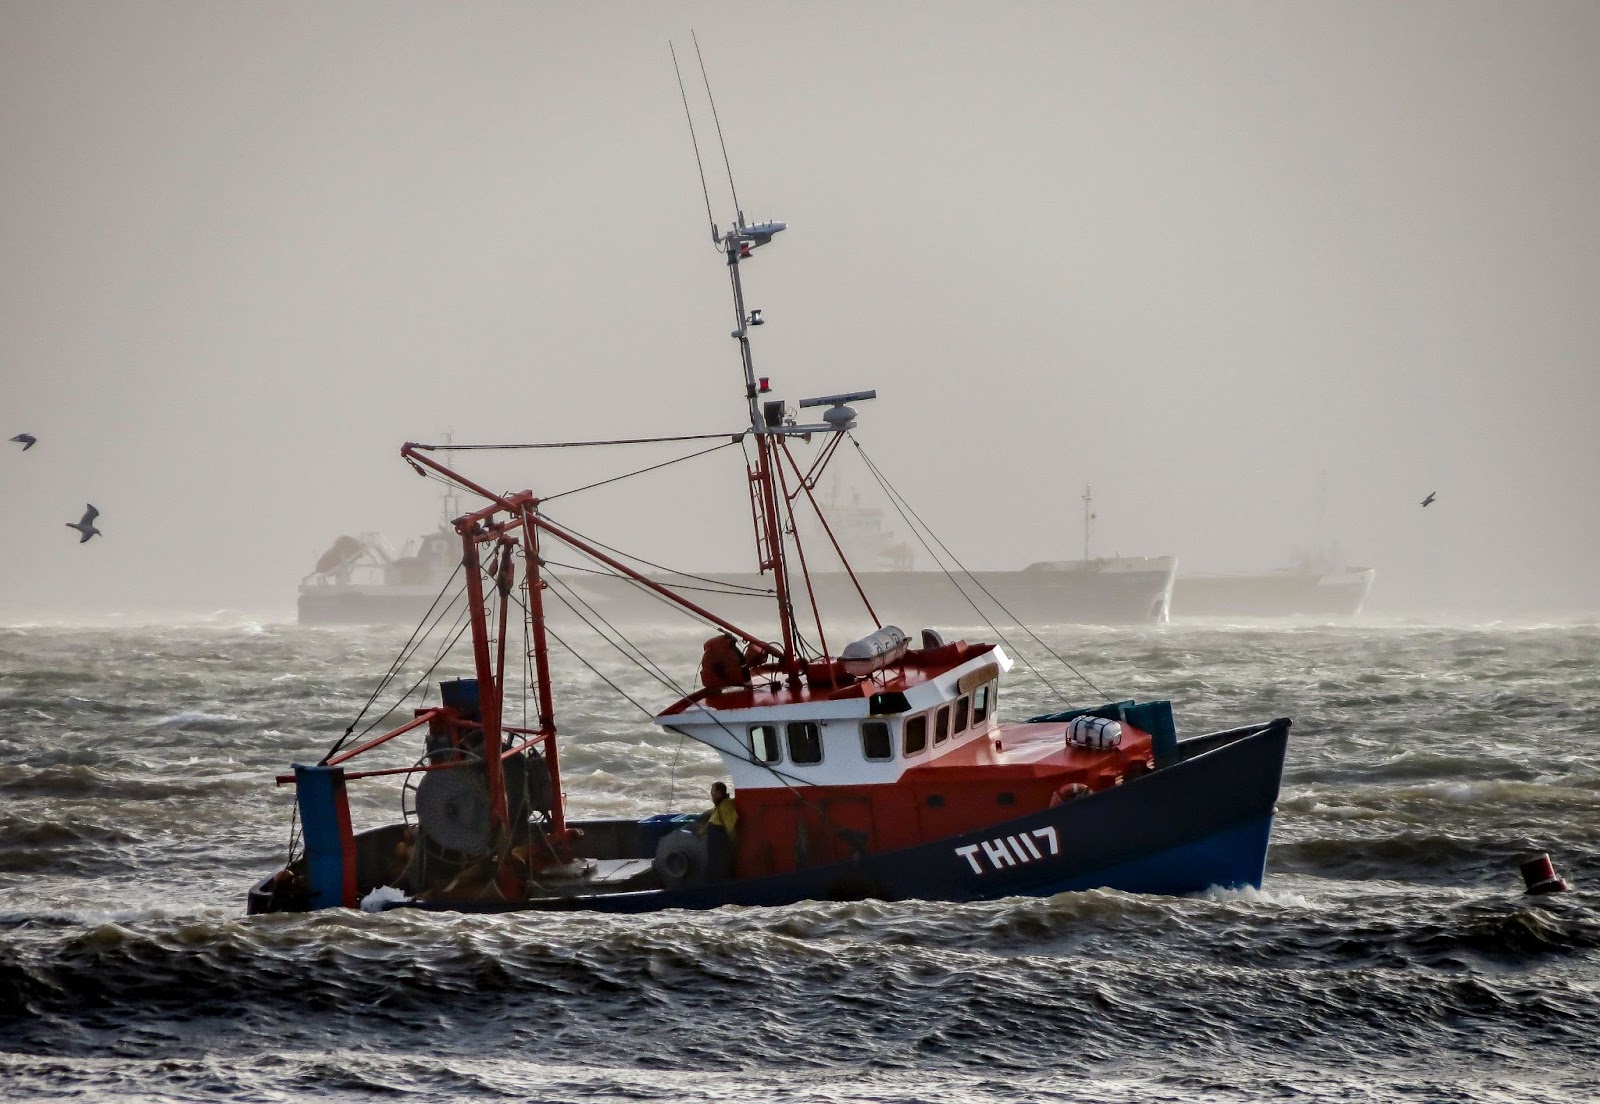 Renting a trawler to live on